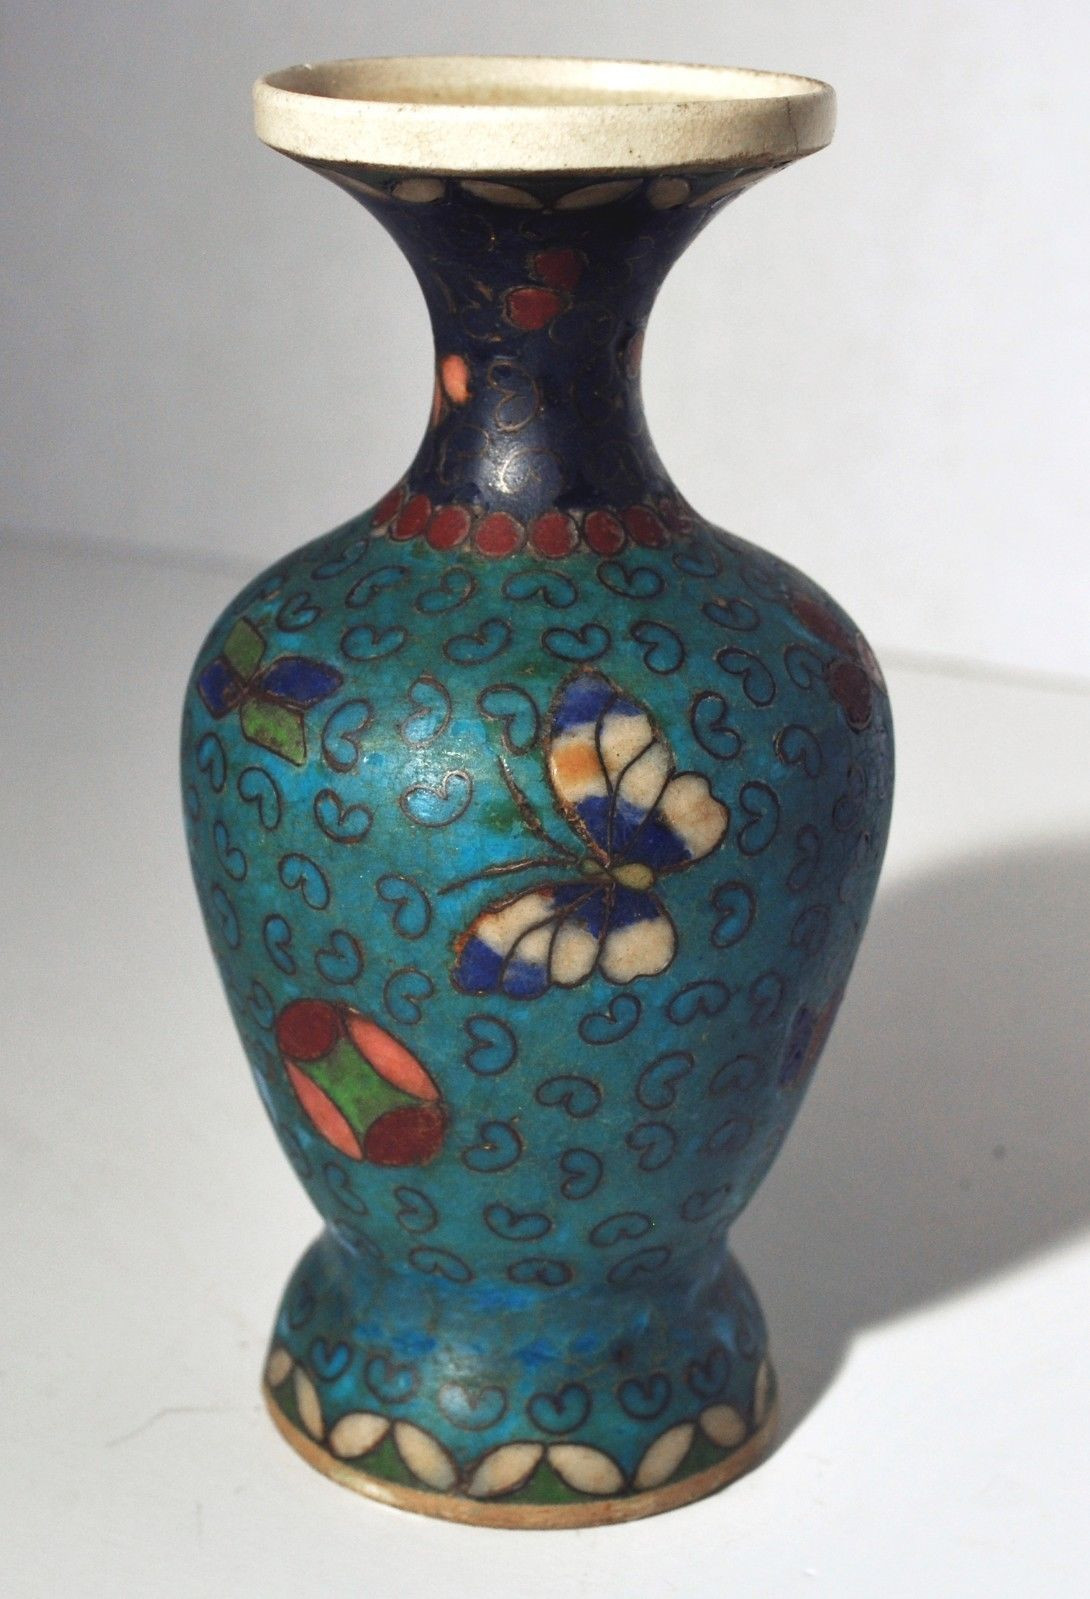 23 Awesome Cloisonne Vase Marks 2024 free download cloisonne vase marks of meiji period totai shippo japanese cloisonne and 50 similar items with meiji period totai shippo japanese cloisonne and 50 similar items